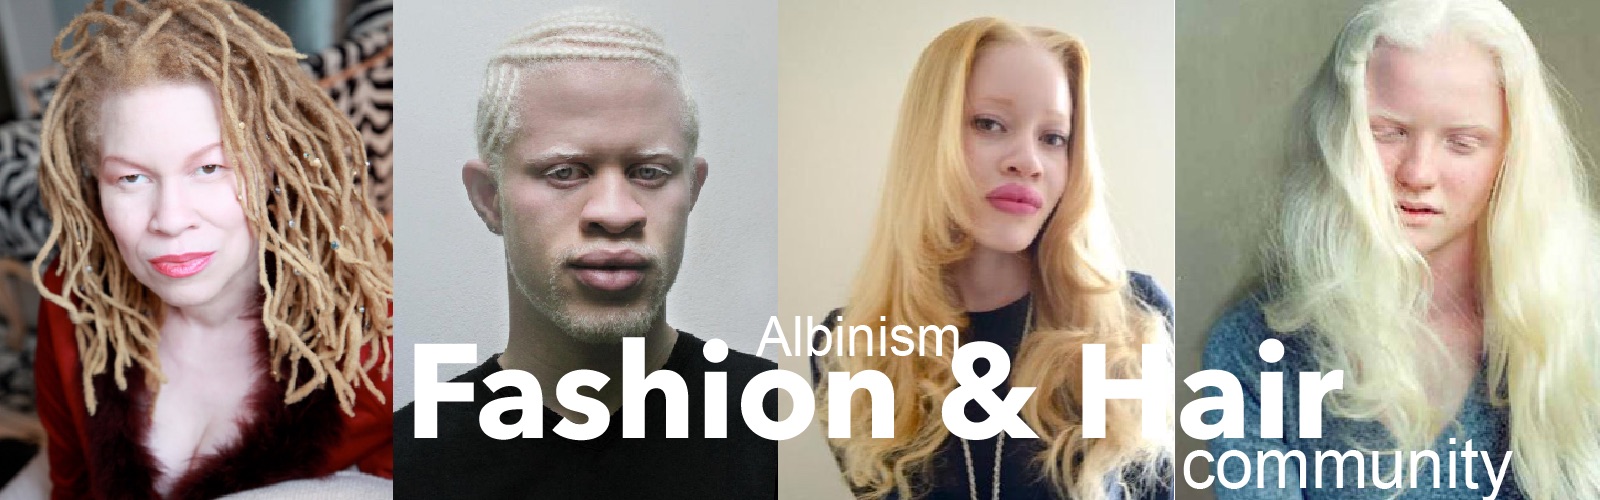 Albinism and Respect for persons with Albinism